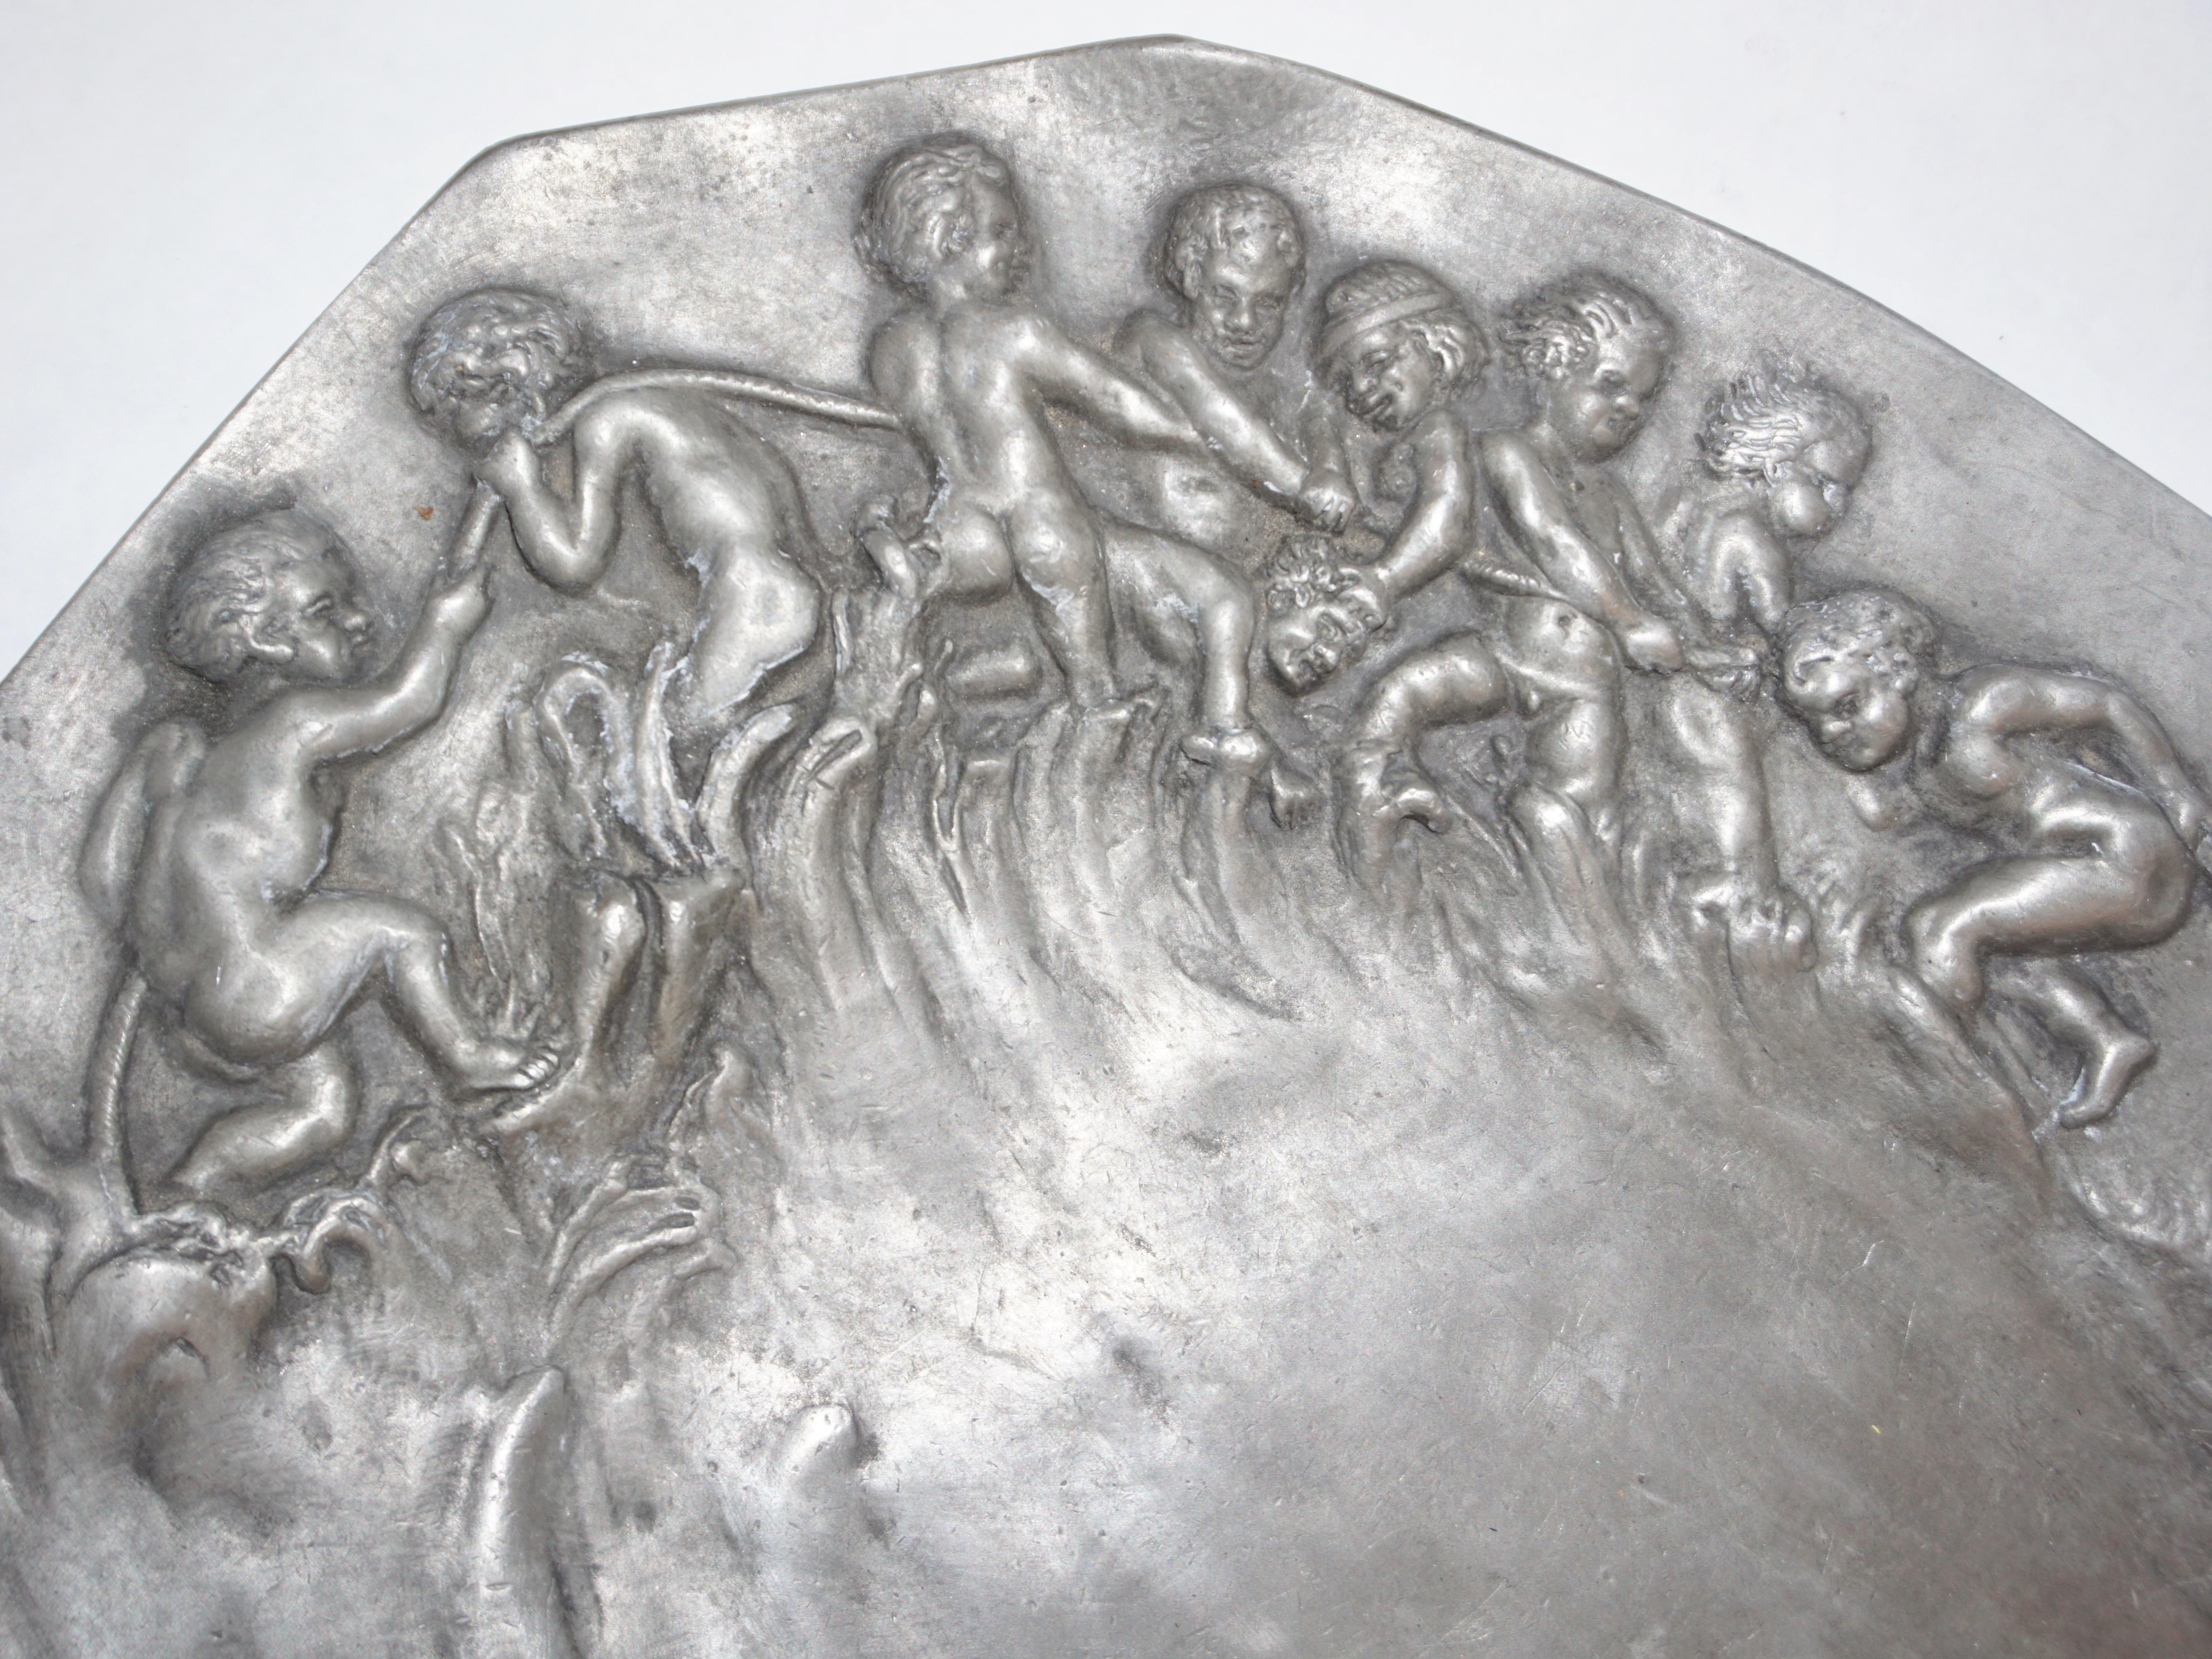 Art Nouveau handcrafted sculpted work in pewter by French artist E. Duchez circa 1900, signed piece with an interesting octagonal shape, showing a happy scene, with high quality in the details representing embossed playful putti in relief pulling a